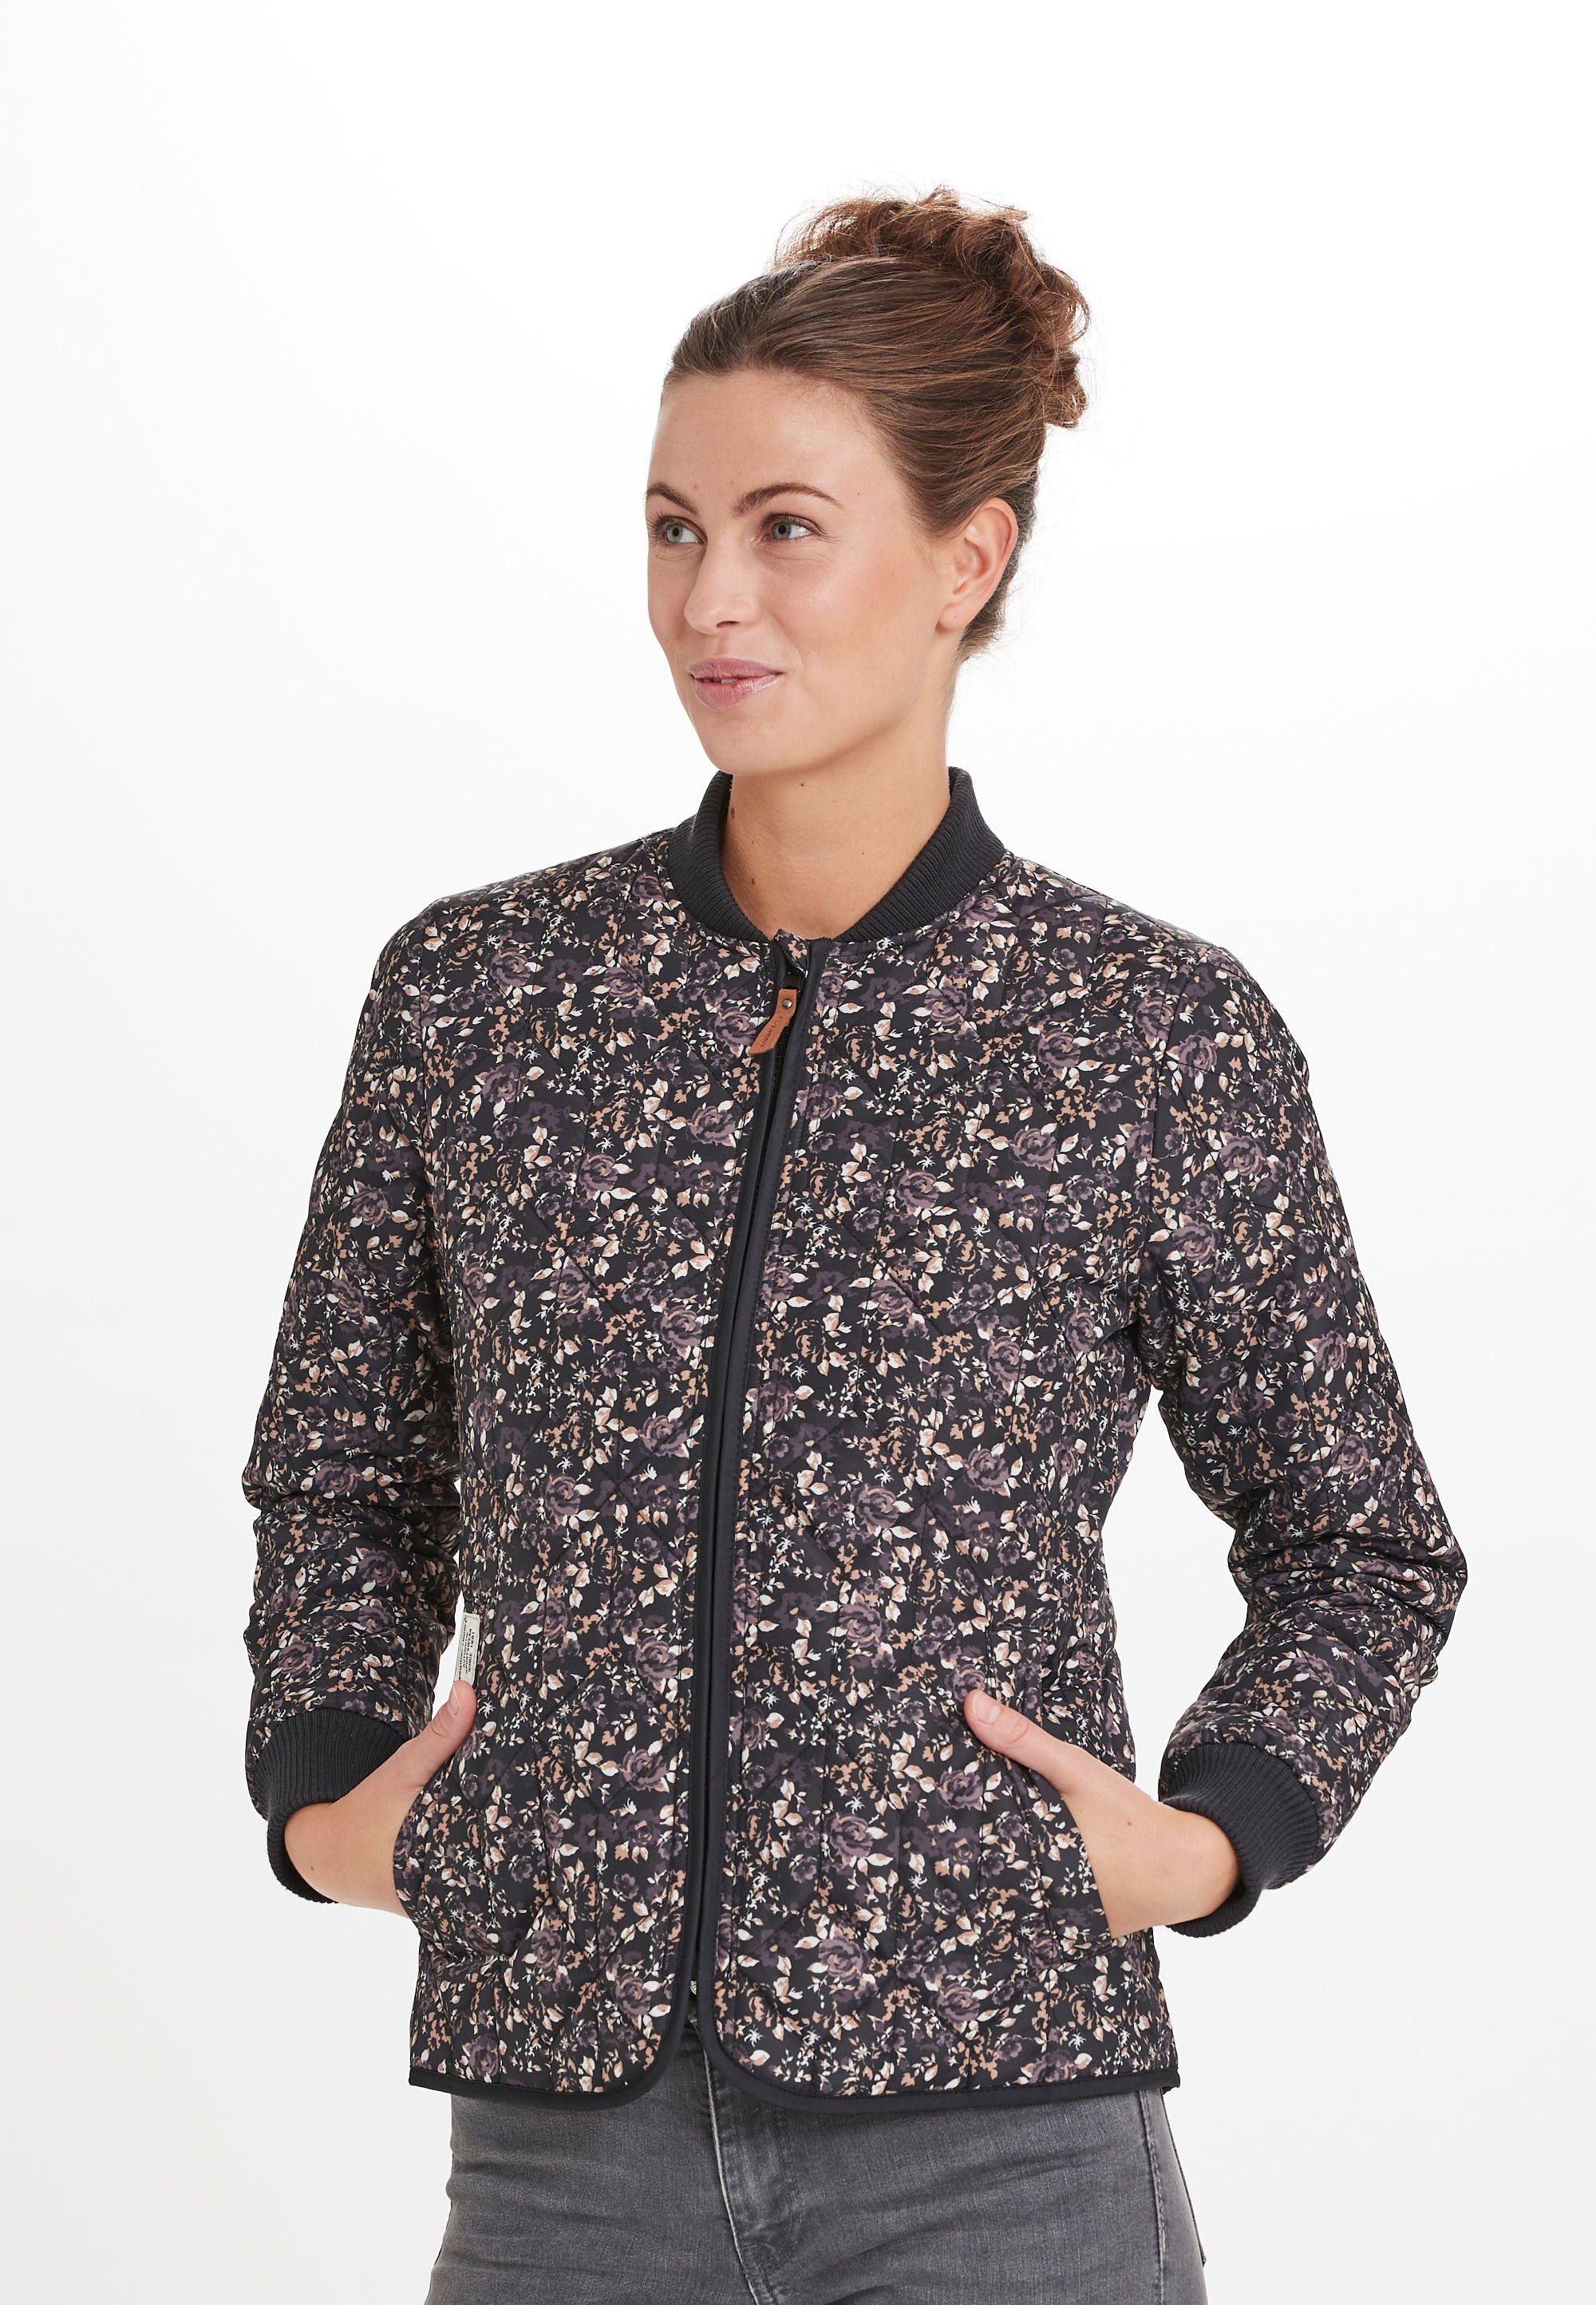 WEATHER REPORT Outdoorjacke »Floral«, online mit floralem Allover-Muster